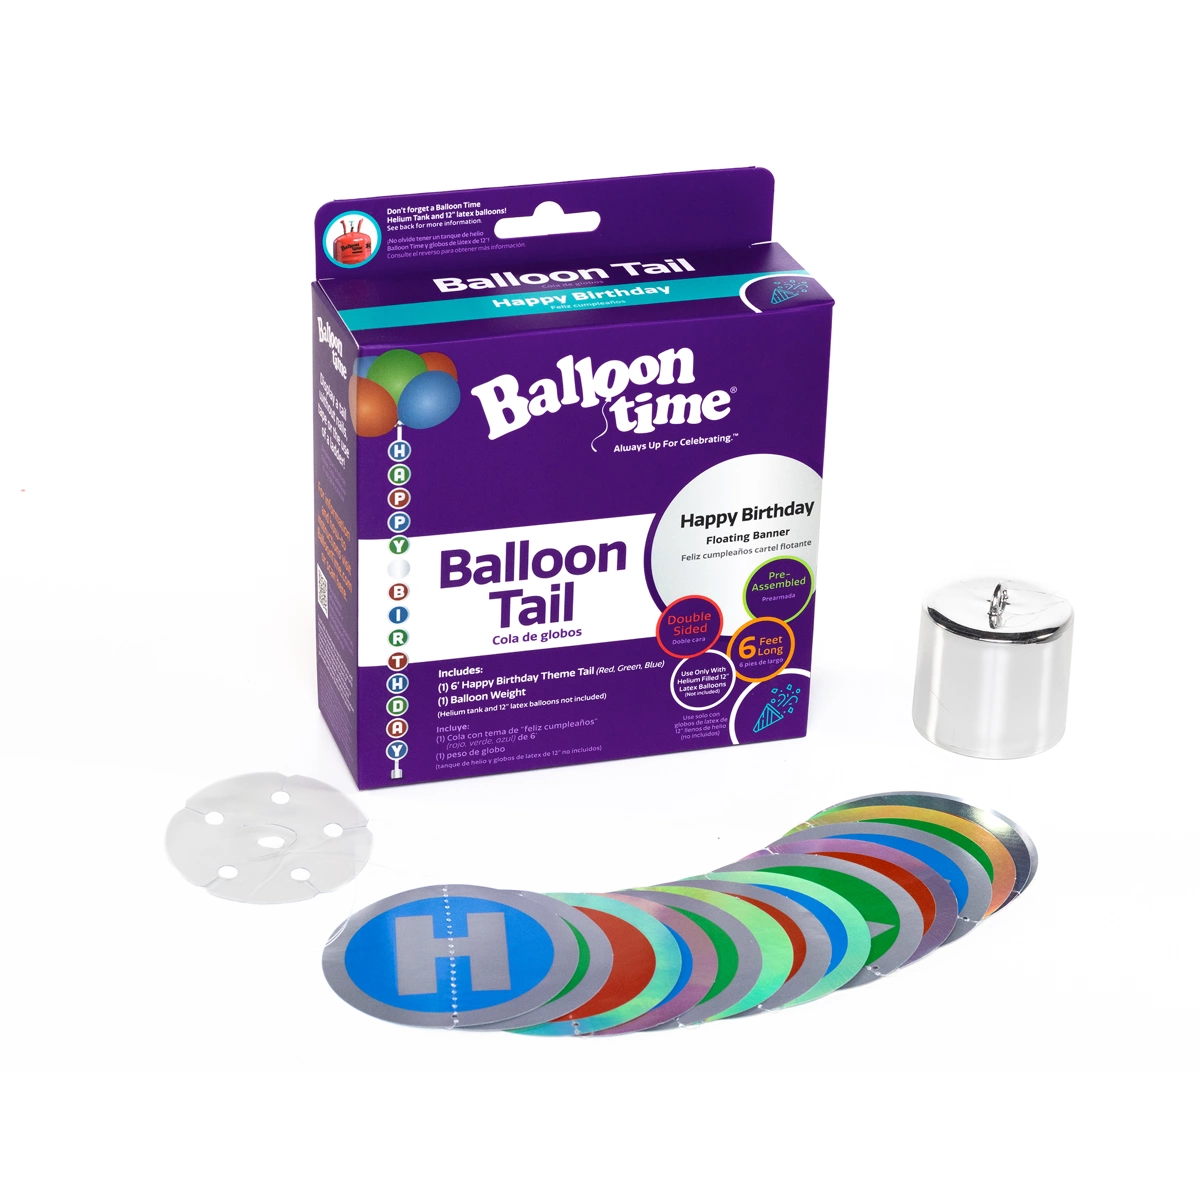 Primary Color Birthday Balloon Tail Box with tail and weight